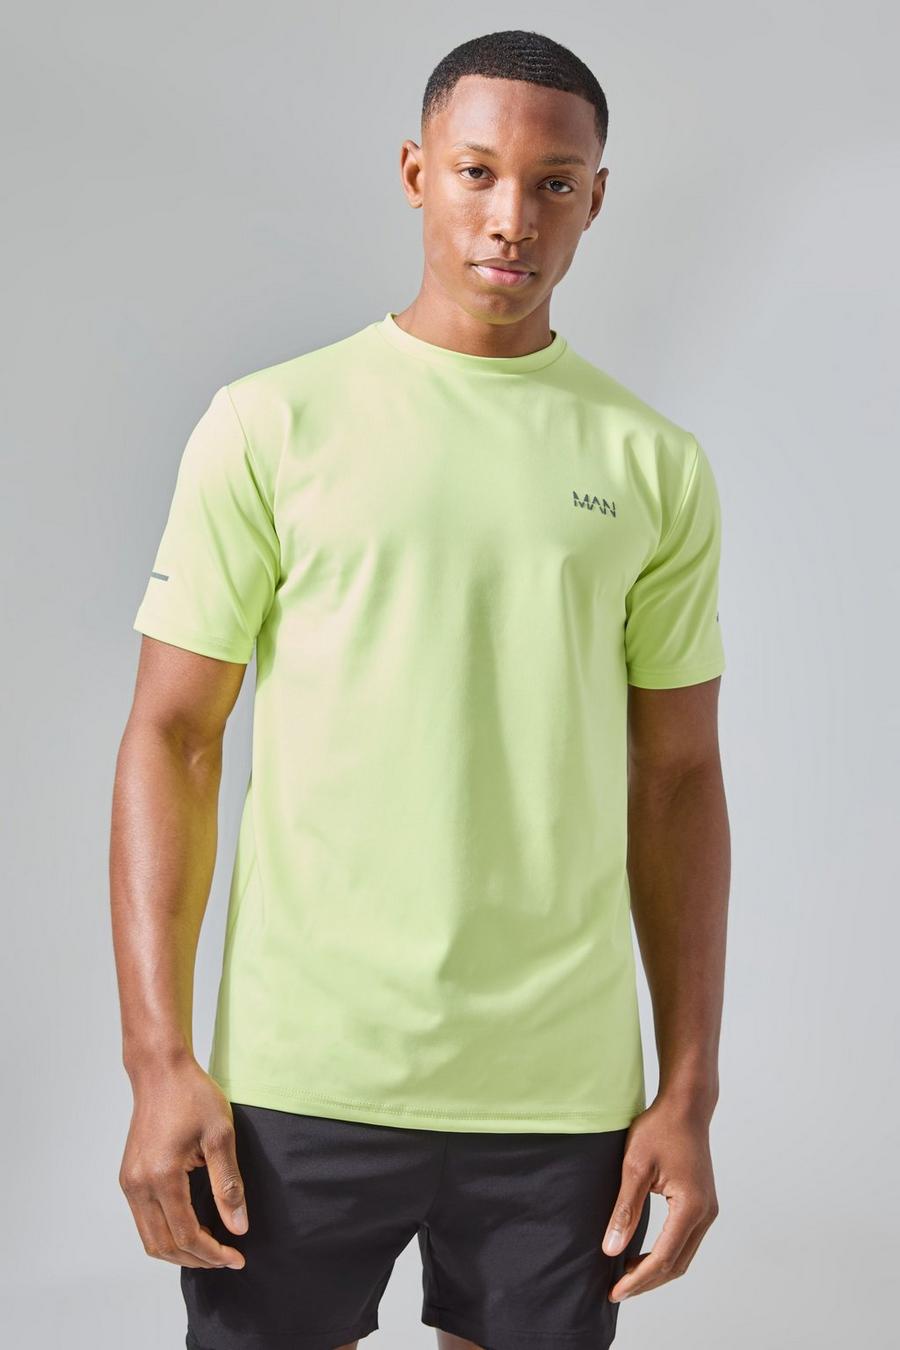 Man Active Performance T-Shirt, Green image number 1